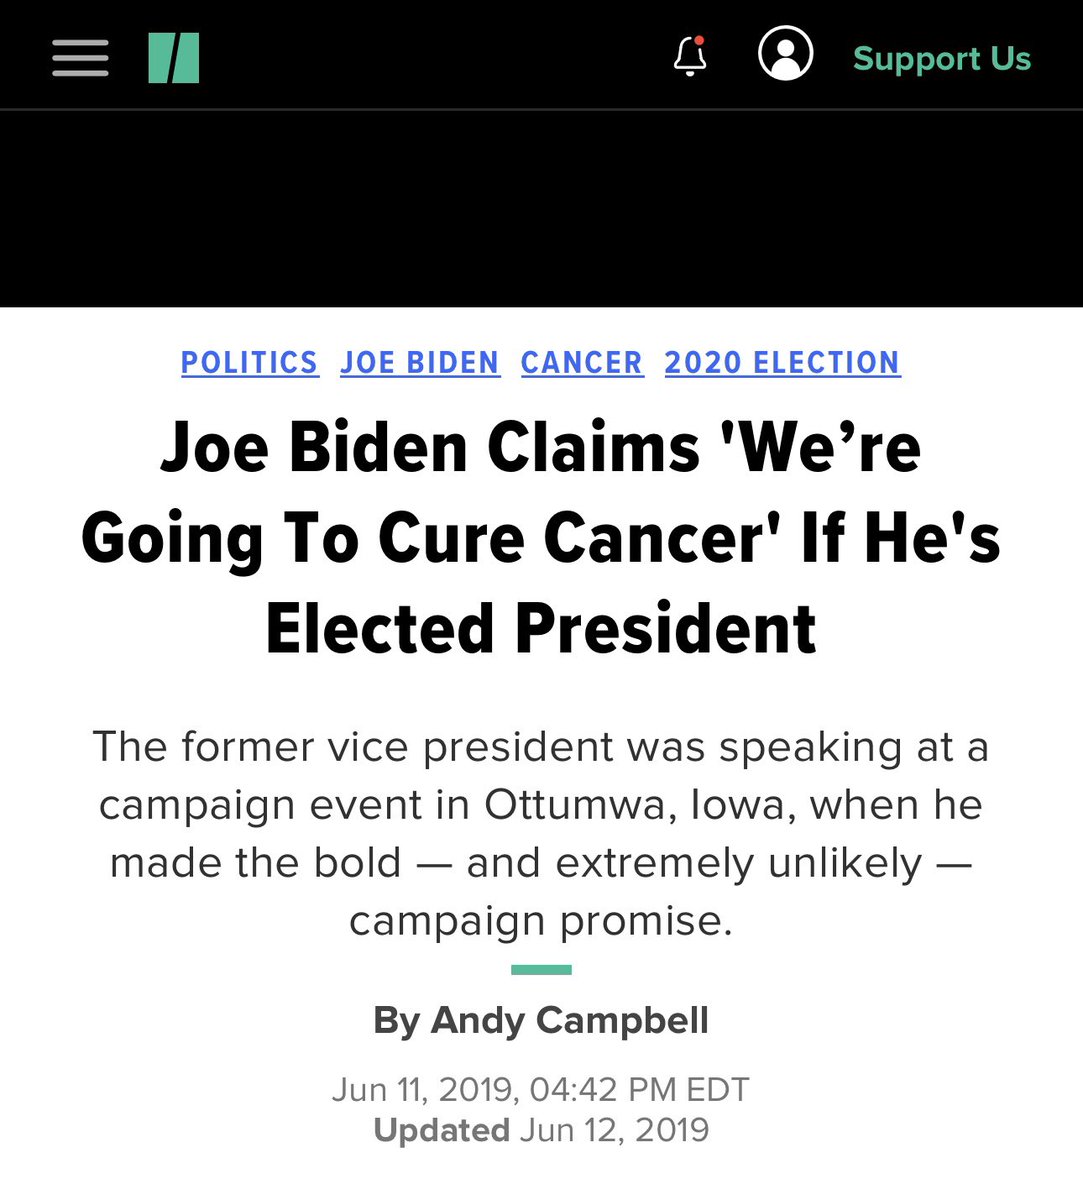 Has Joe Biden cured cancer yet like he promised? The clock is ticking! He has 6 months left to fulfill this campaign promise!